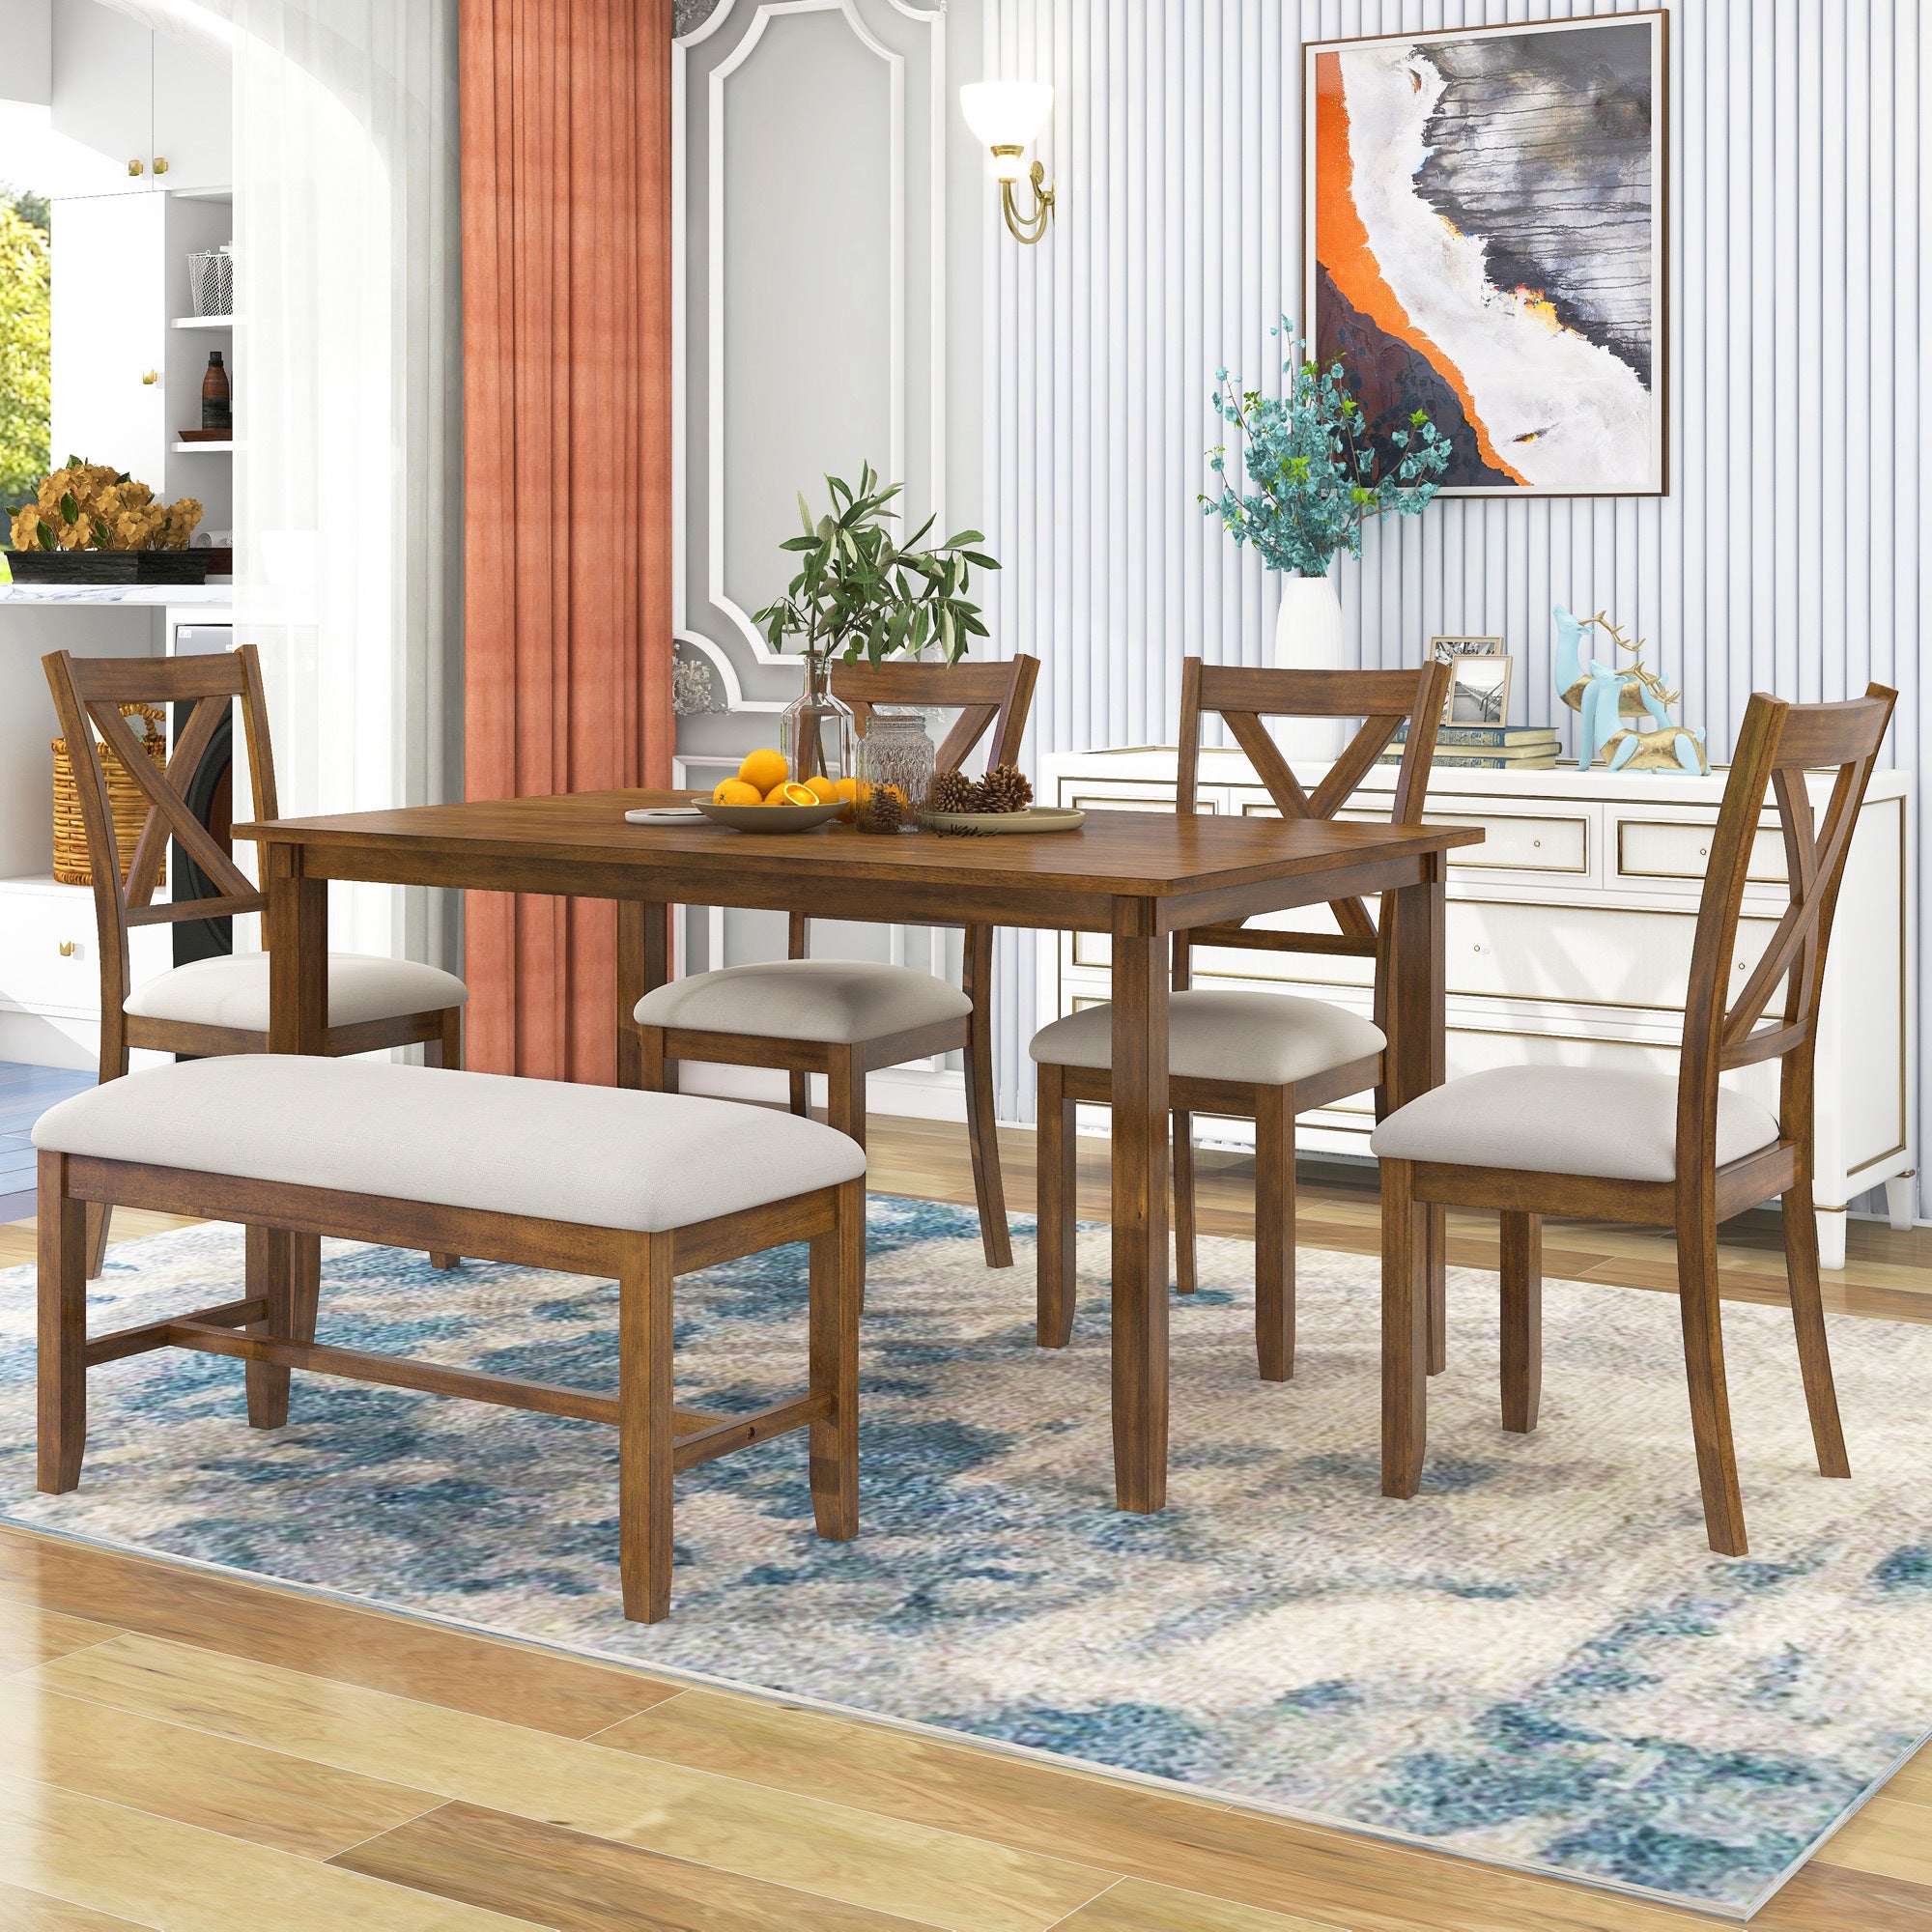 🆓🚛 6-Piece Kitchen Dining Table Set Wooden Rectangular Dining Table, 4 Fabric Chairs & Bench Family Furniture, Natural Cherry